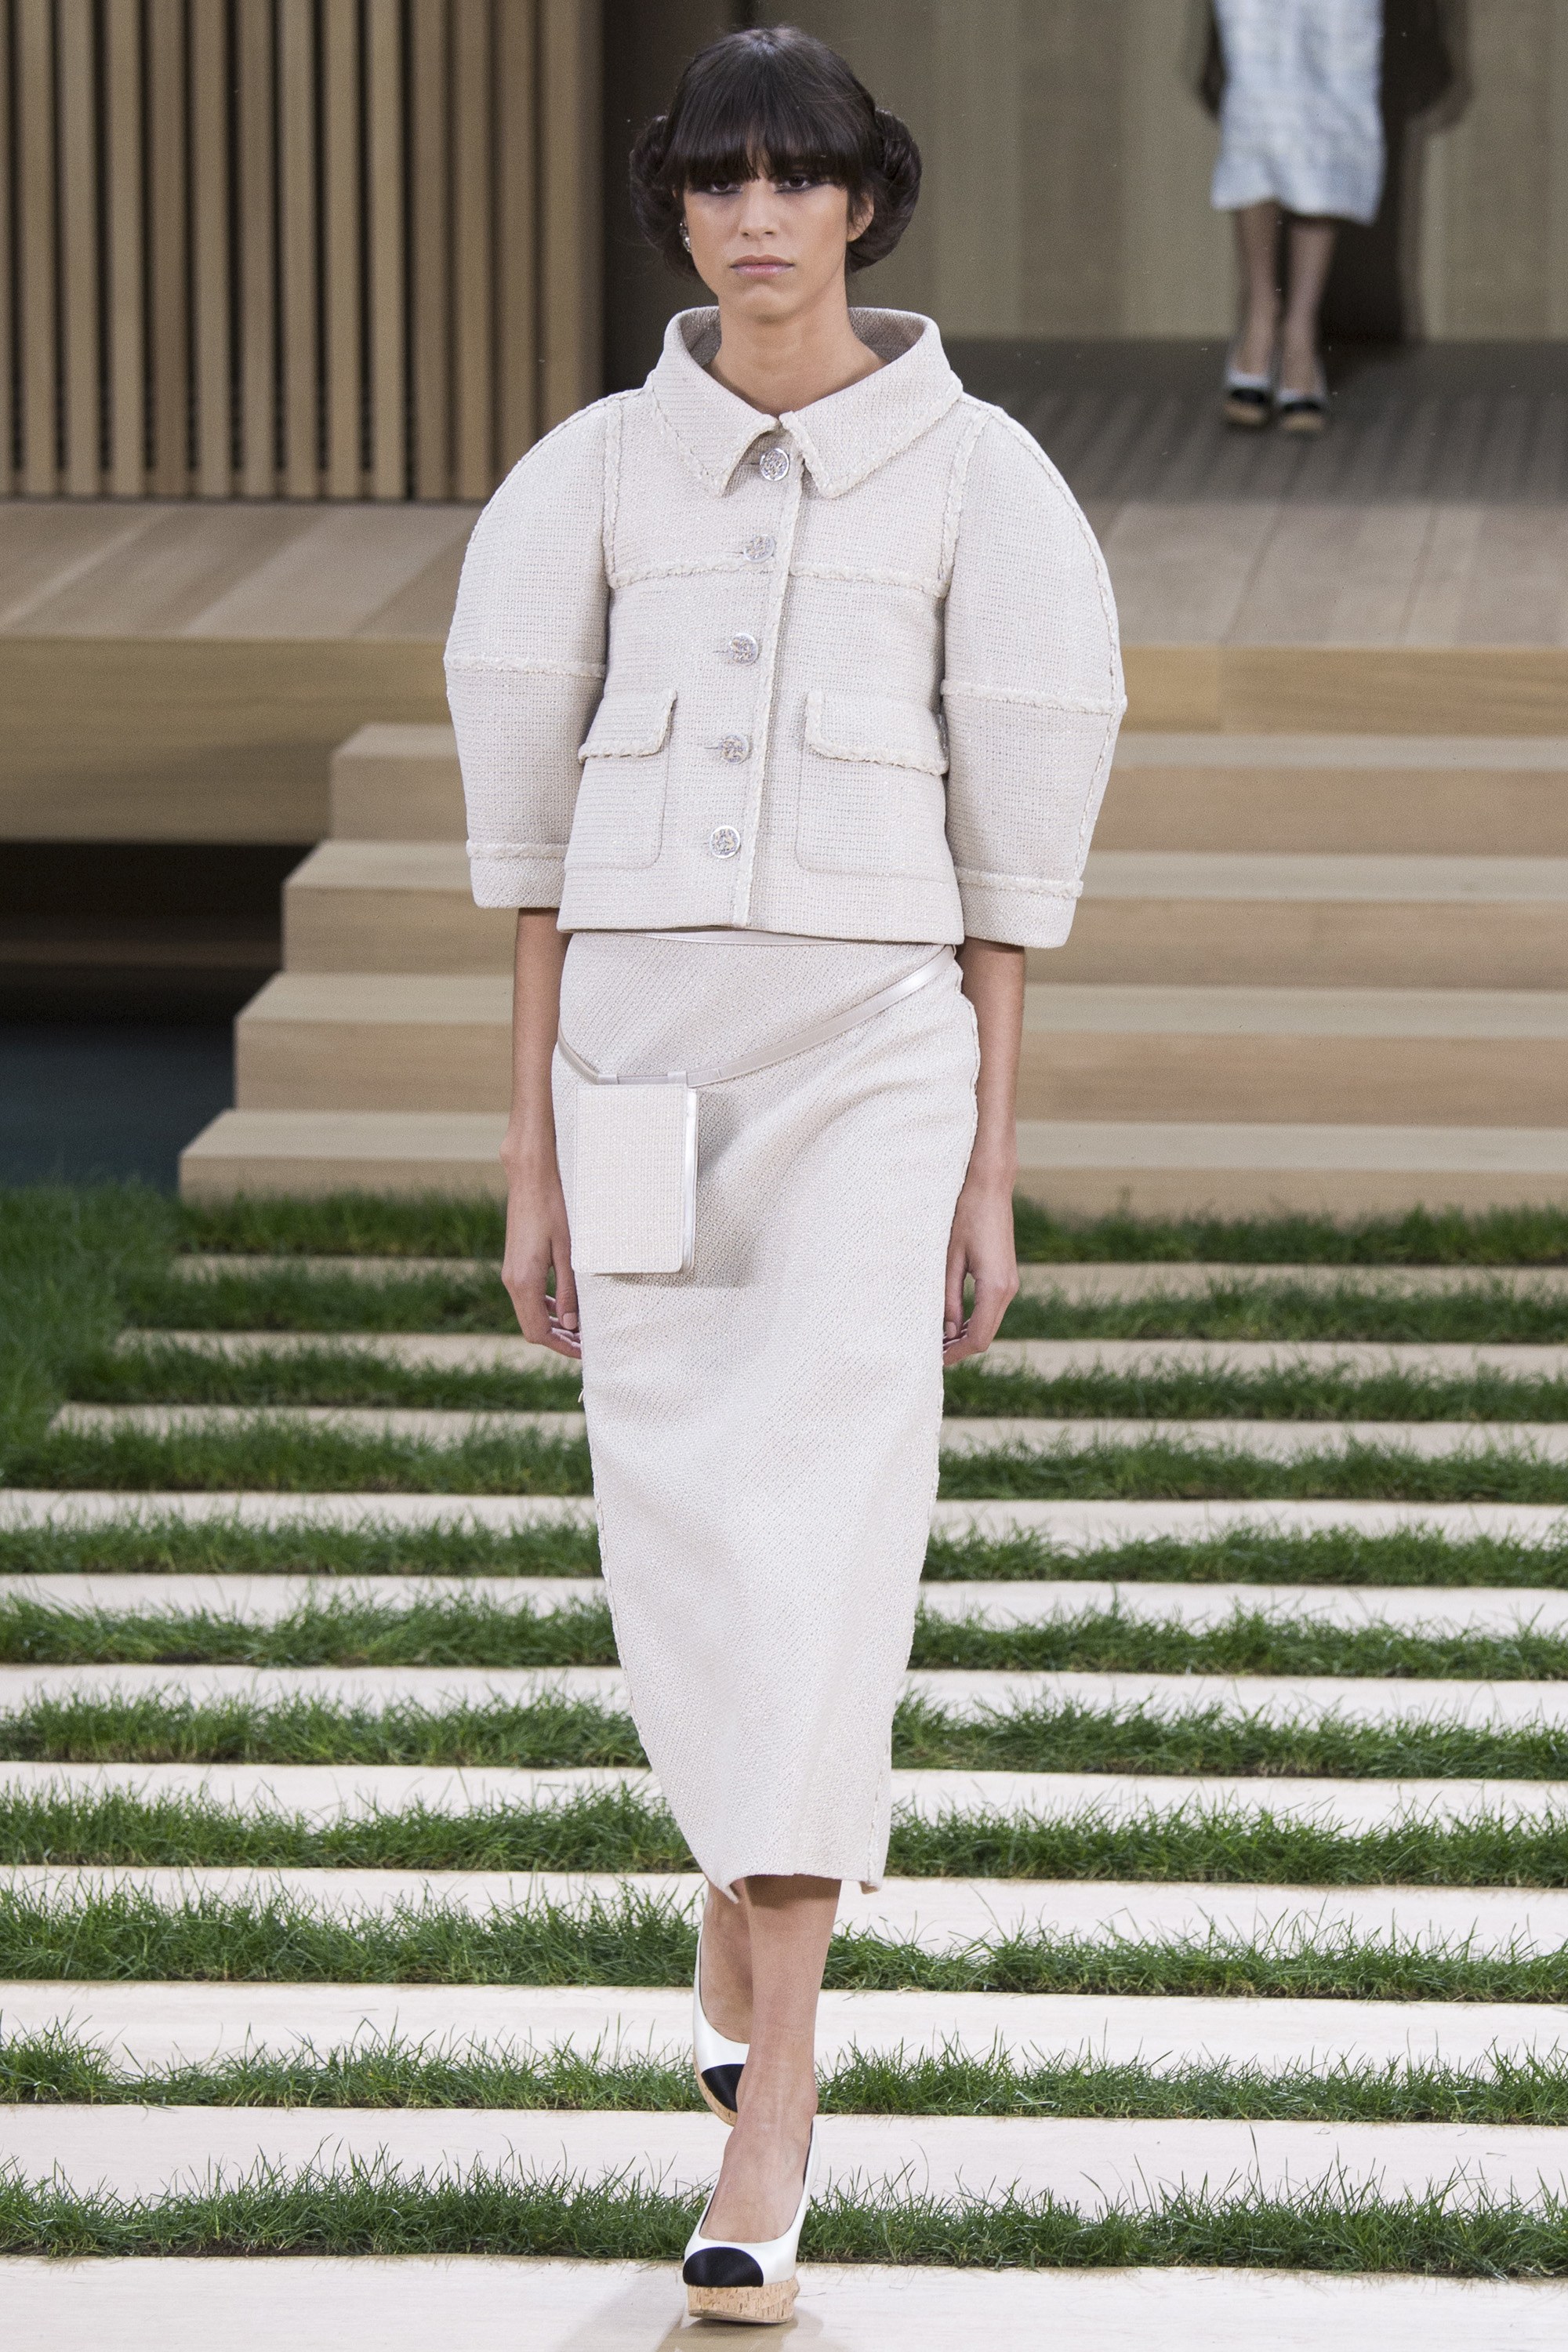 Chanel Couture's Japanese Style